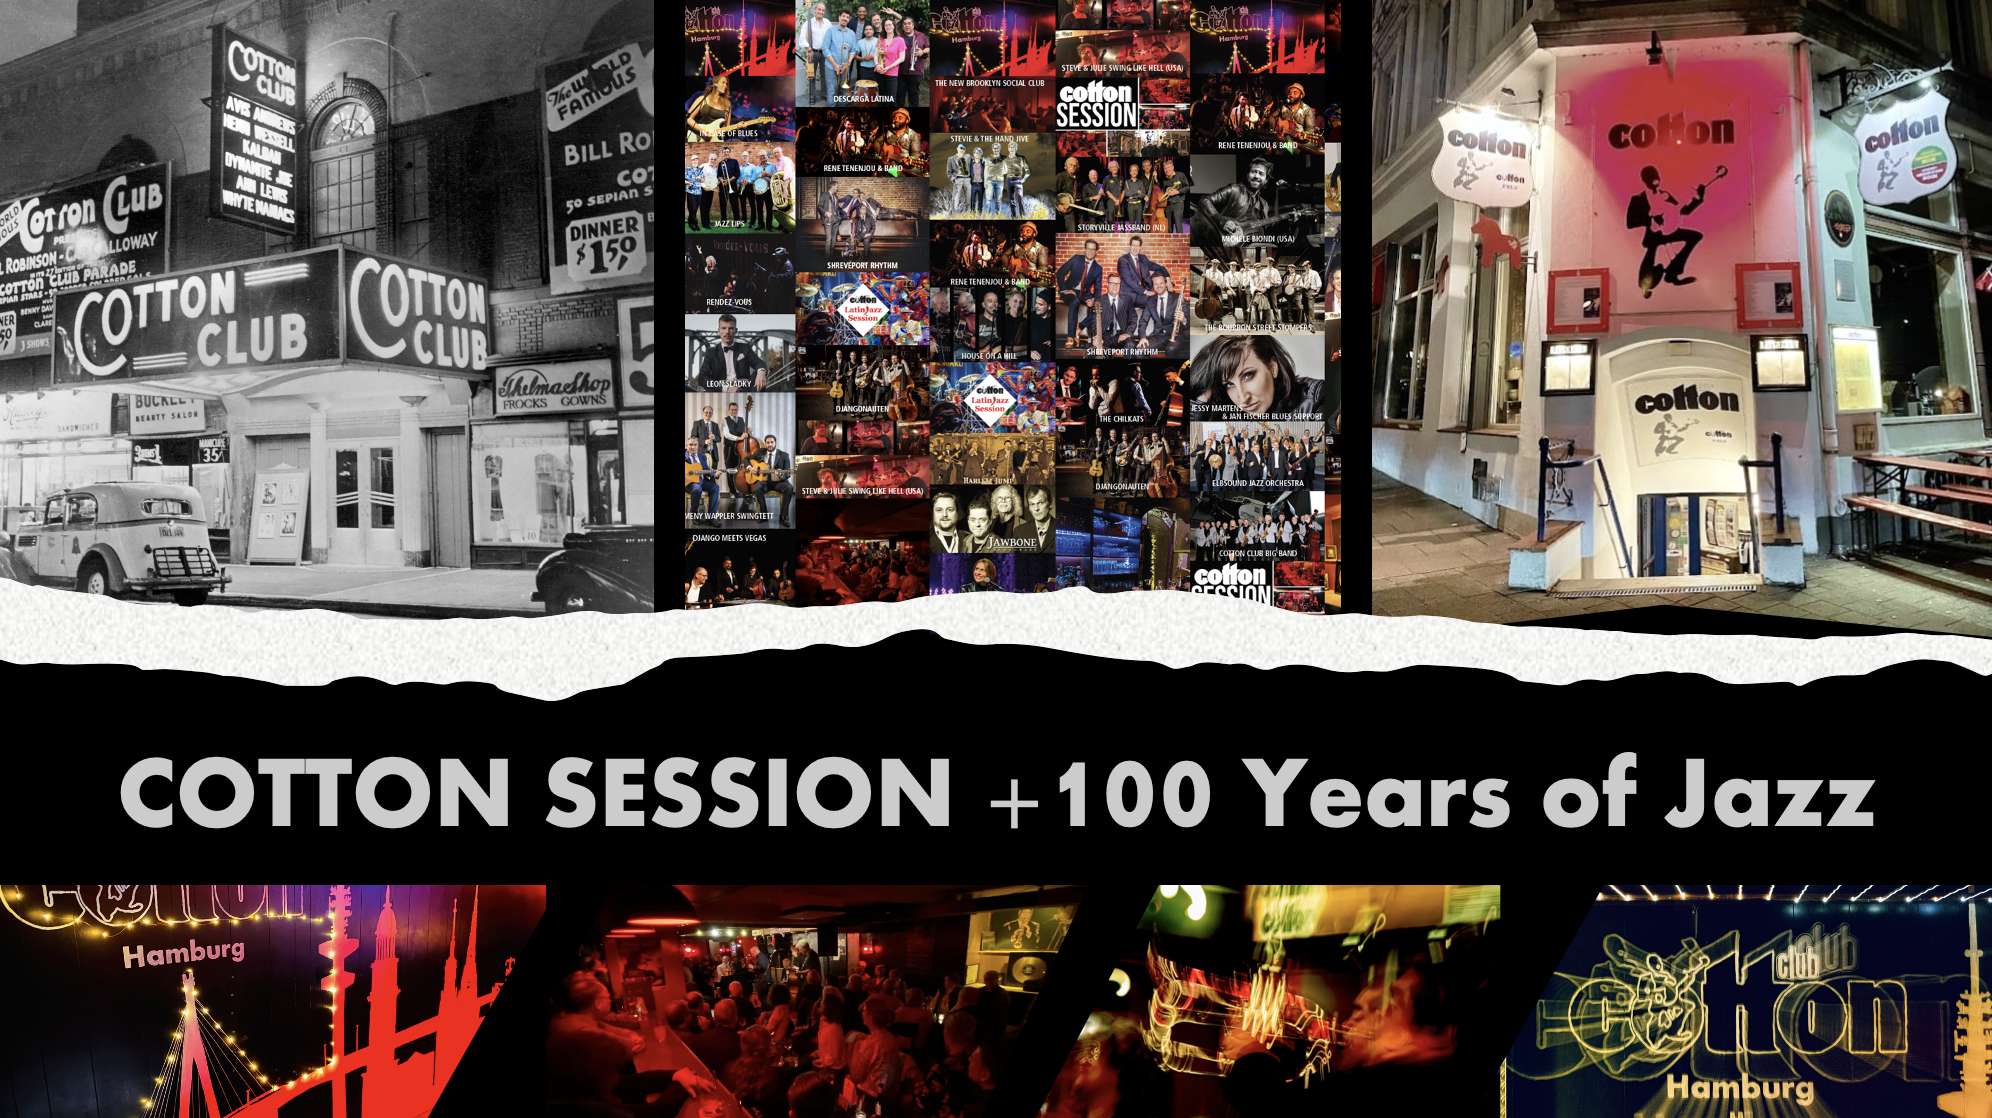 COTTON SESSION +100 YEARS OF JAZZ - led by Jerry Tilitz (Swing & Mainstream)